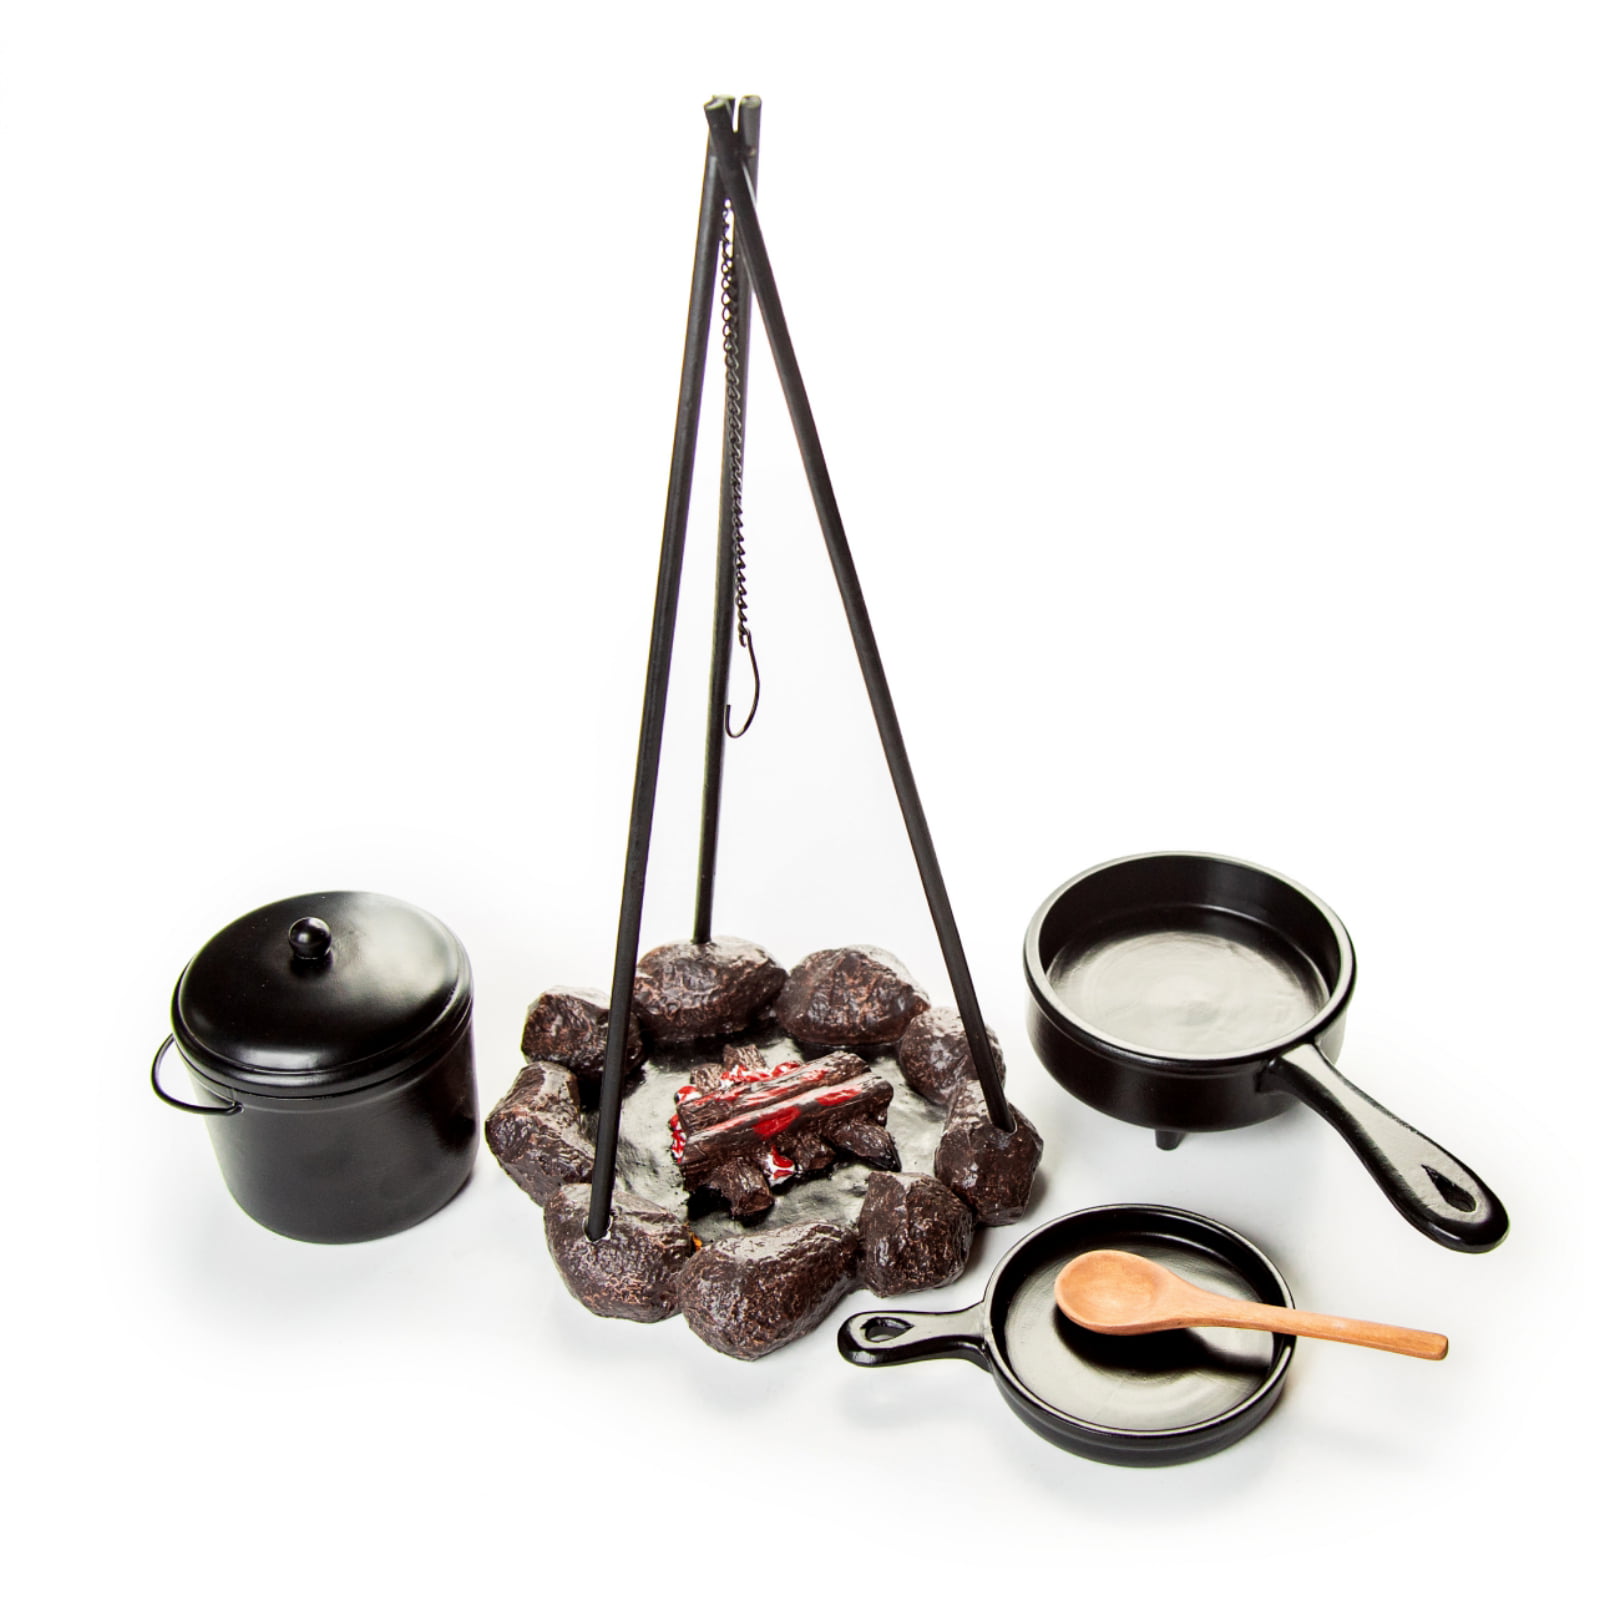 The Queen's Treasures 7 Piece Copper Look Pots, Pans, Kettle + Roast Chicken, Great Accessory for 18 inch Dolls